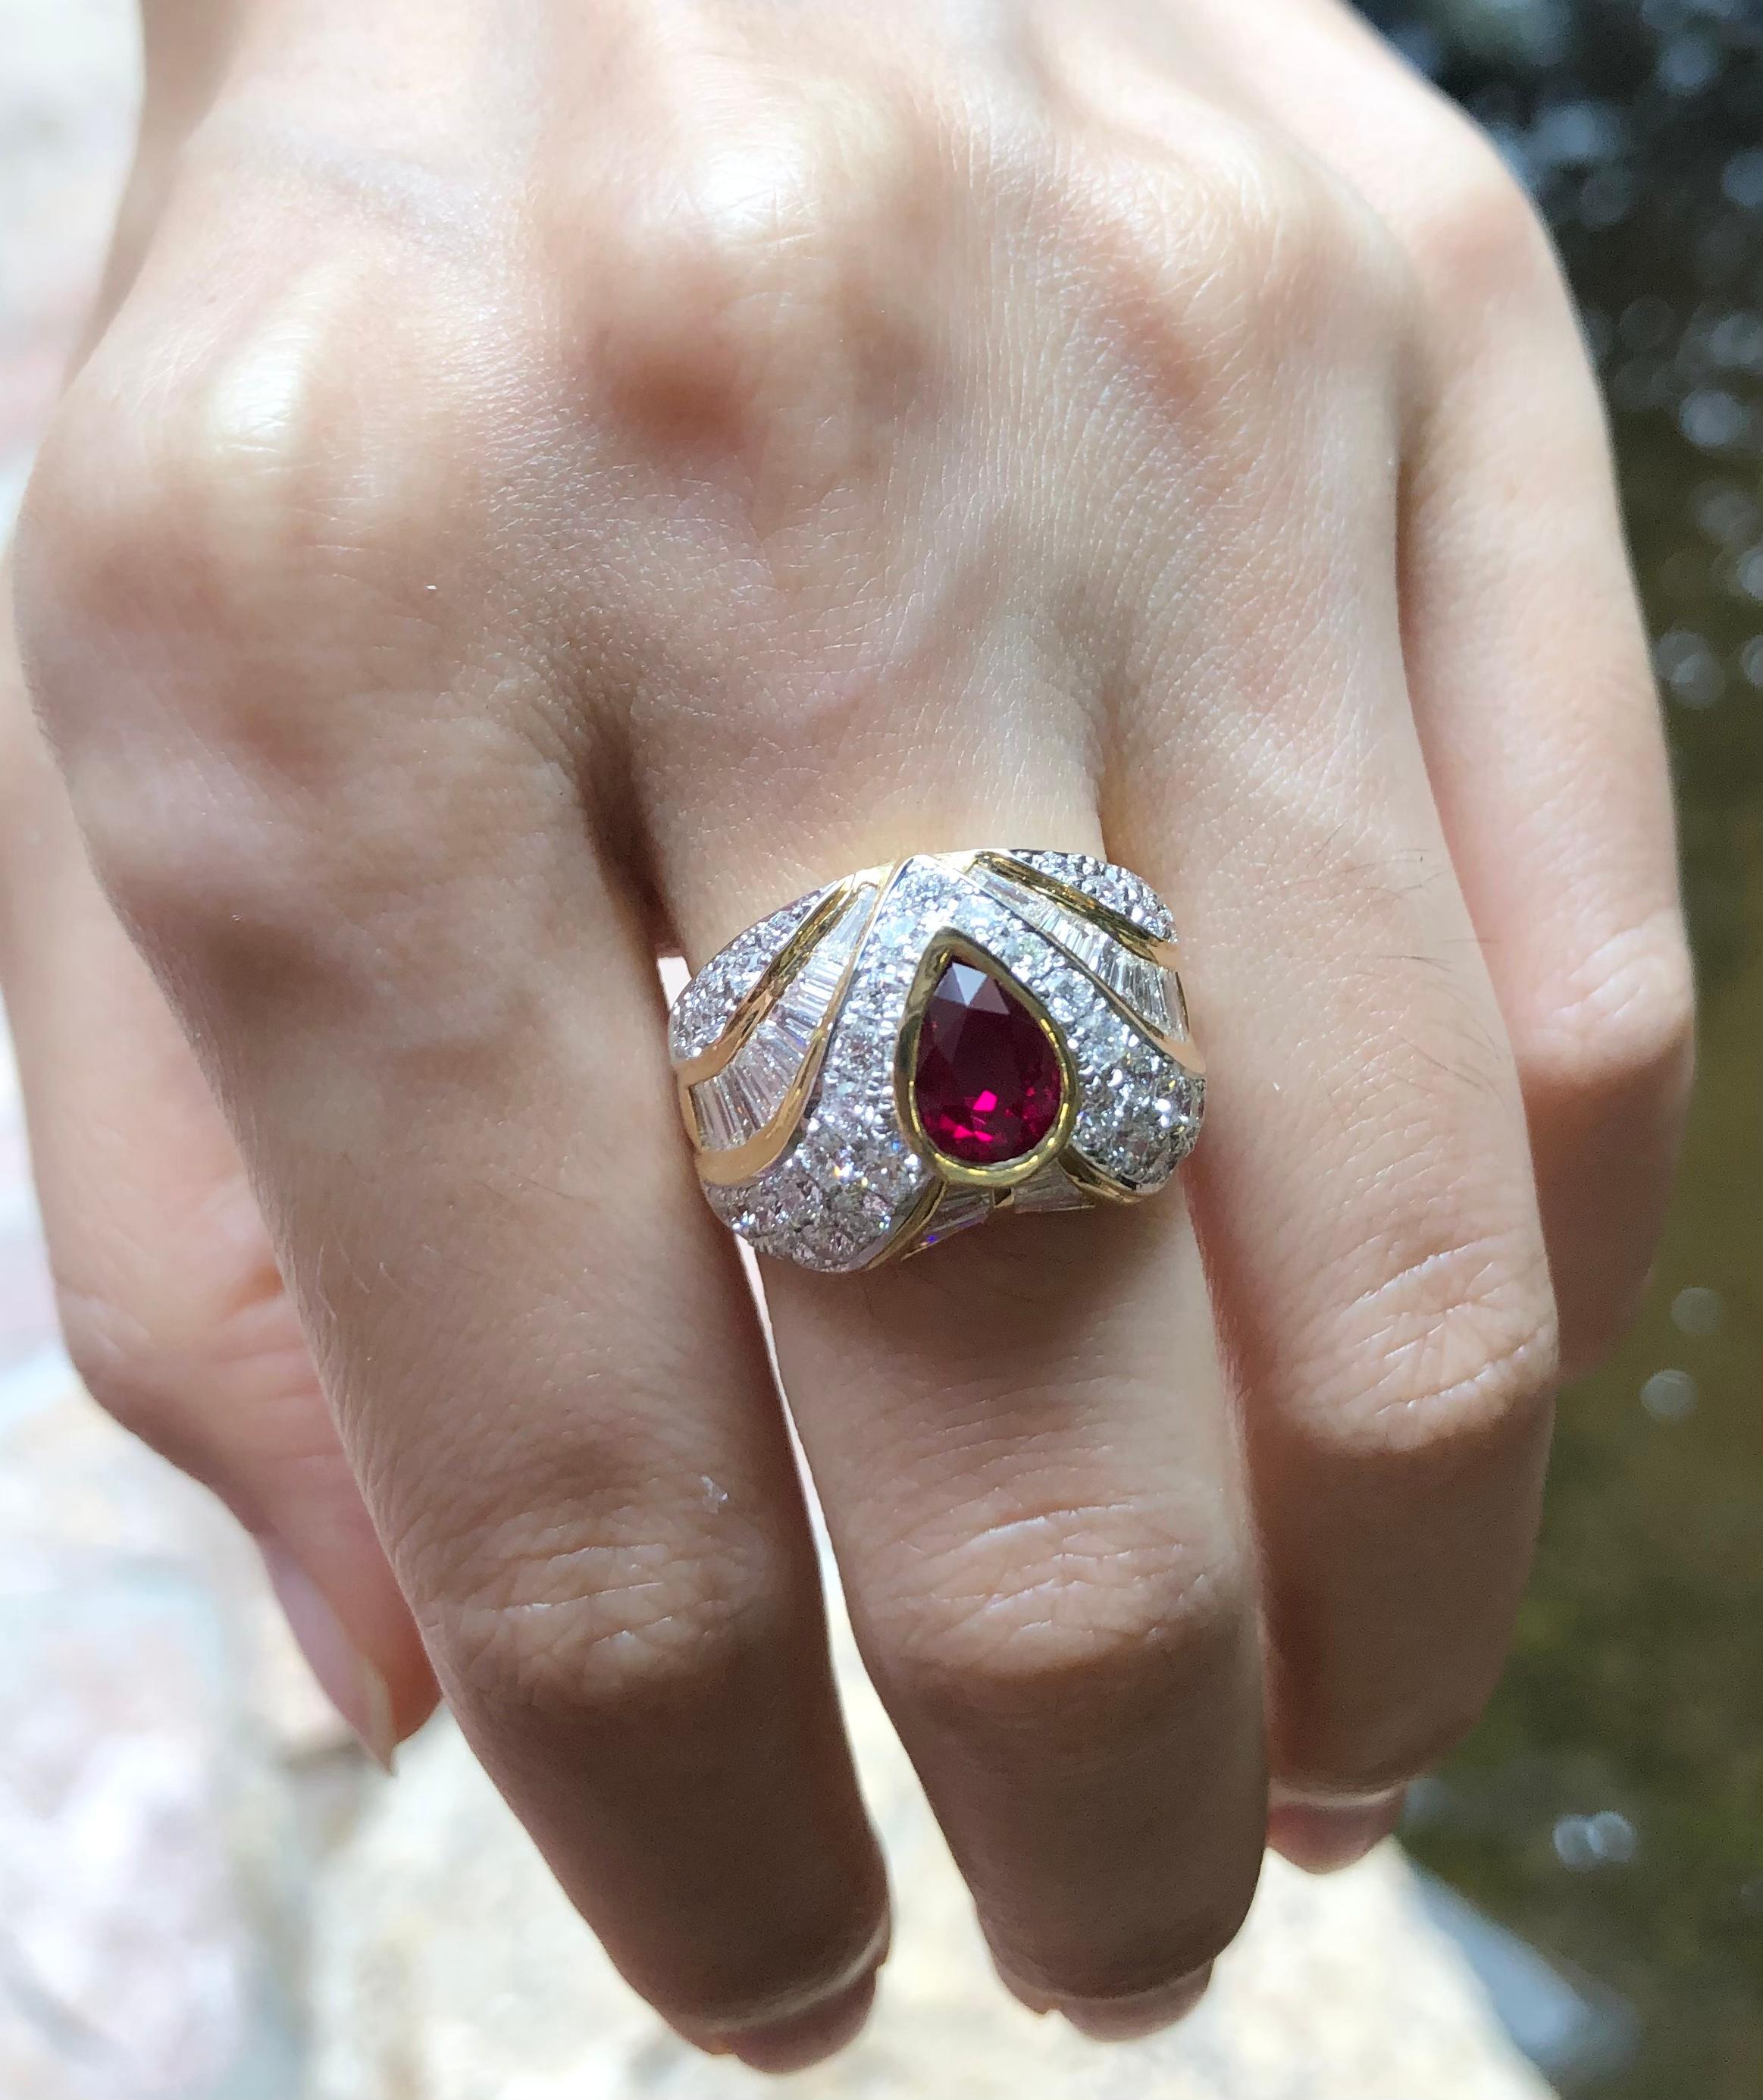 Ruby 1.51 carats with Diamond 2.13 carats Ring set in 18 Karat Gold Settings

Width:  2.1 cm 
Length:  1.5 cm
Ring Size: 55
Total Weight: 9.28 grams

